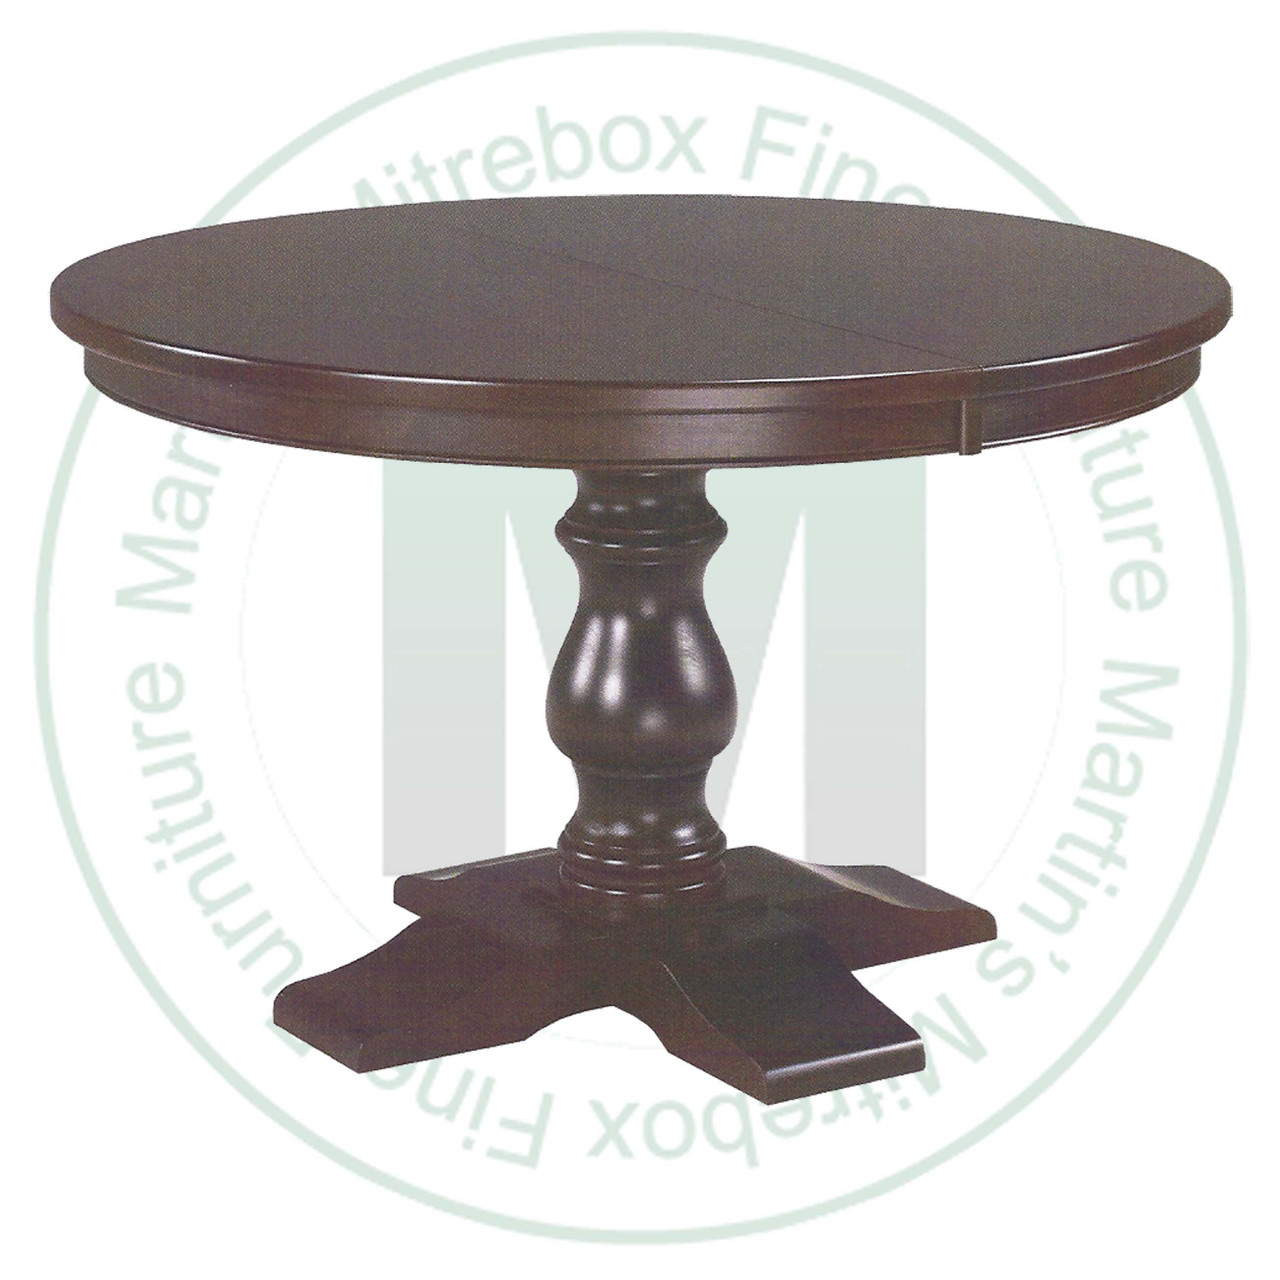 Wormy Maple Savannah Single Pedestal Table 36''D x 42''W x 30''H Round Solid Table. Table Has 1'' Thick Top.